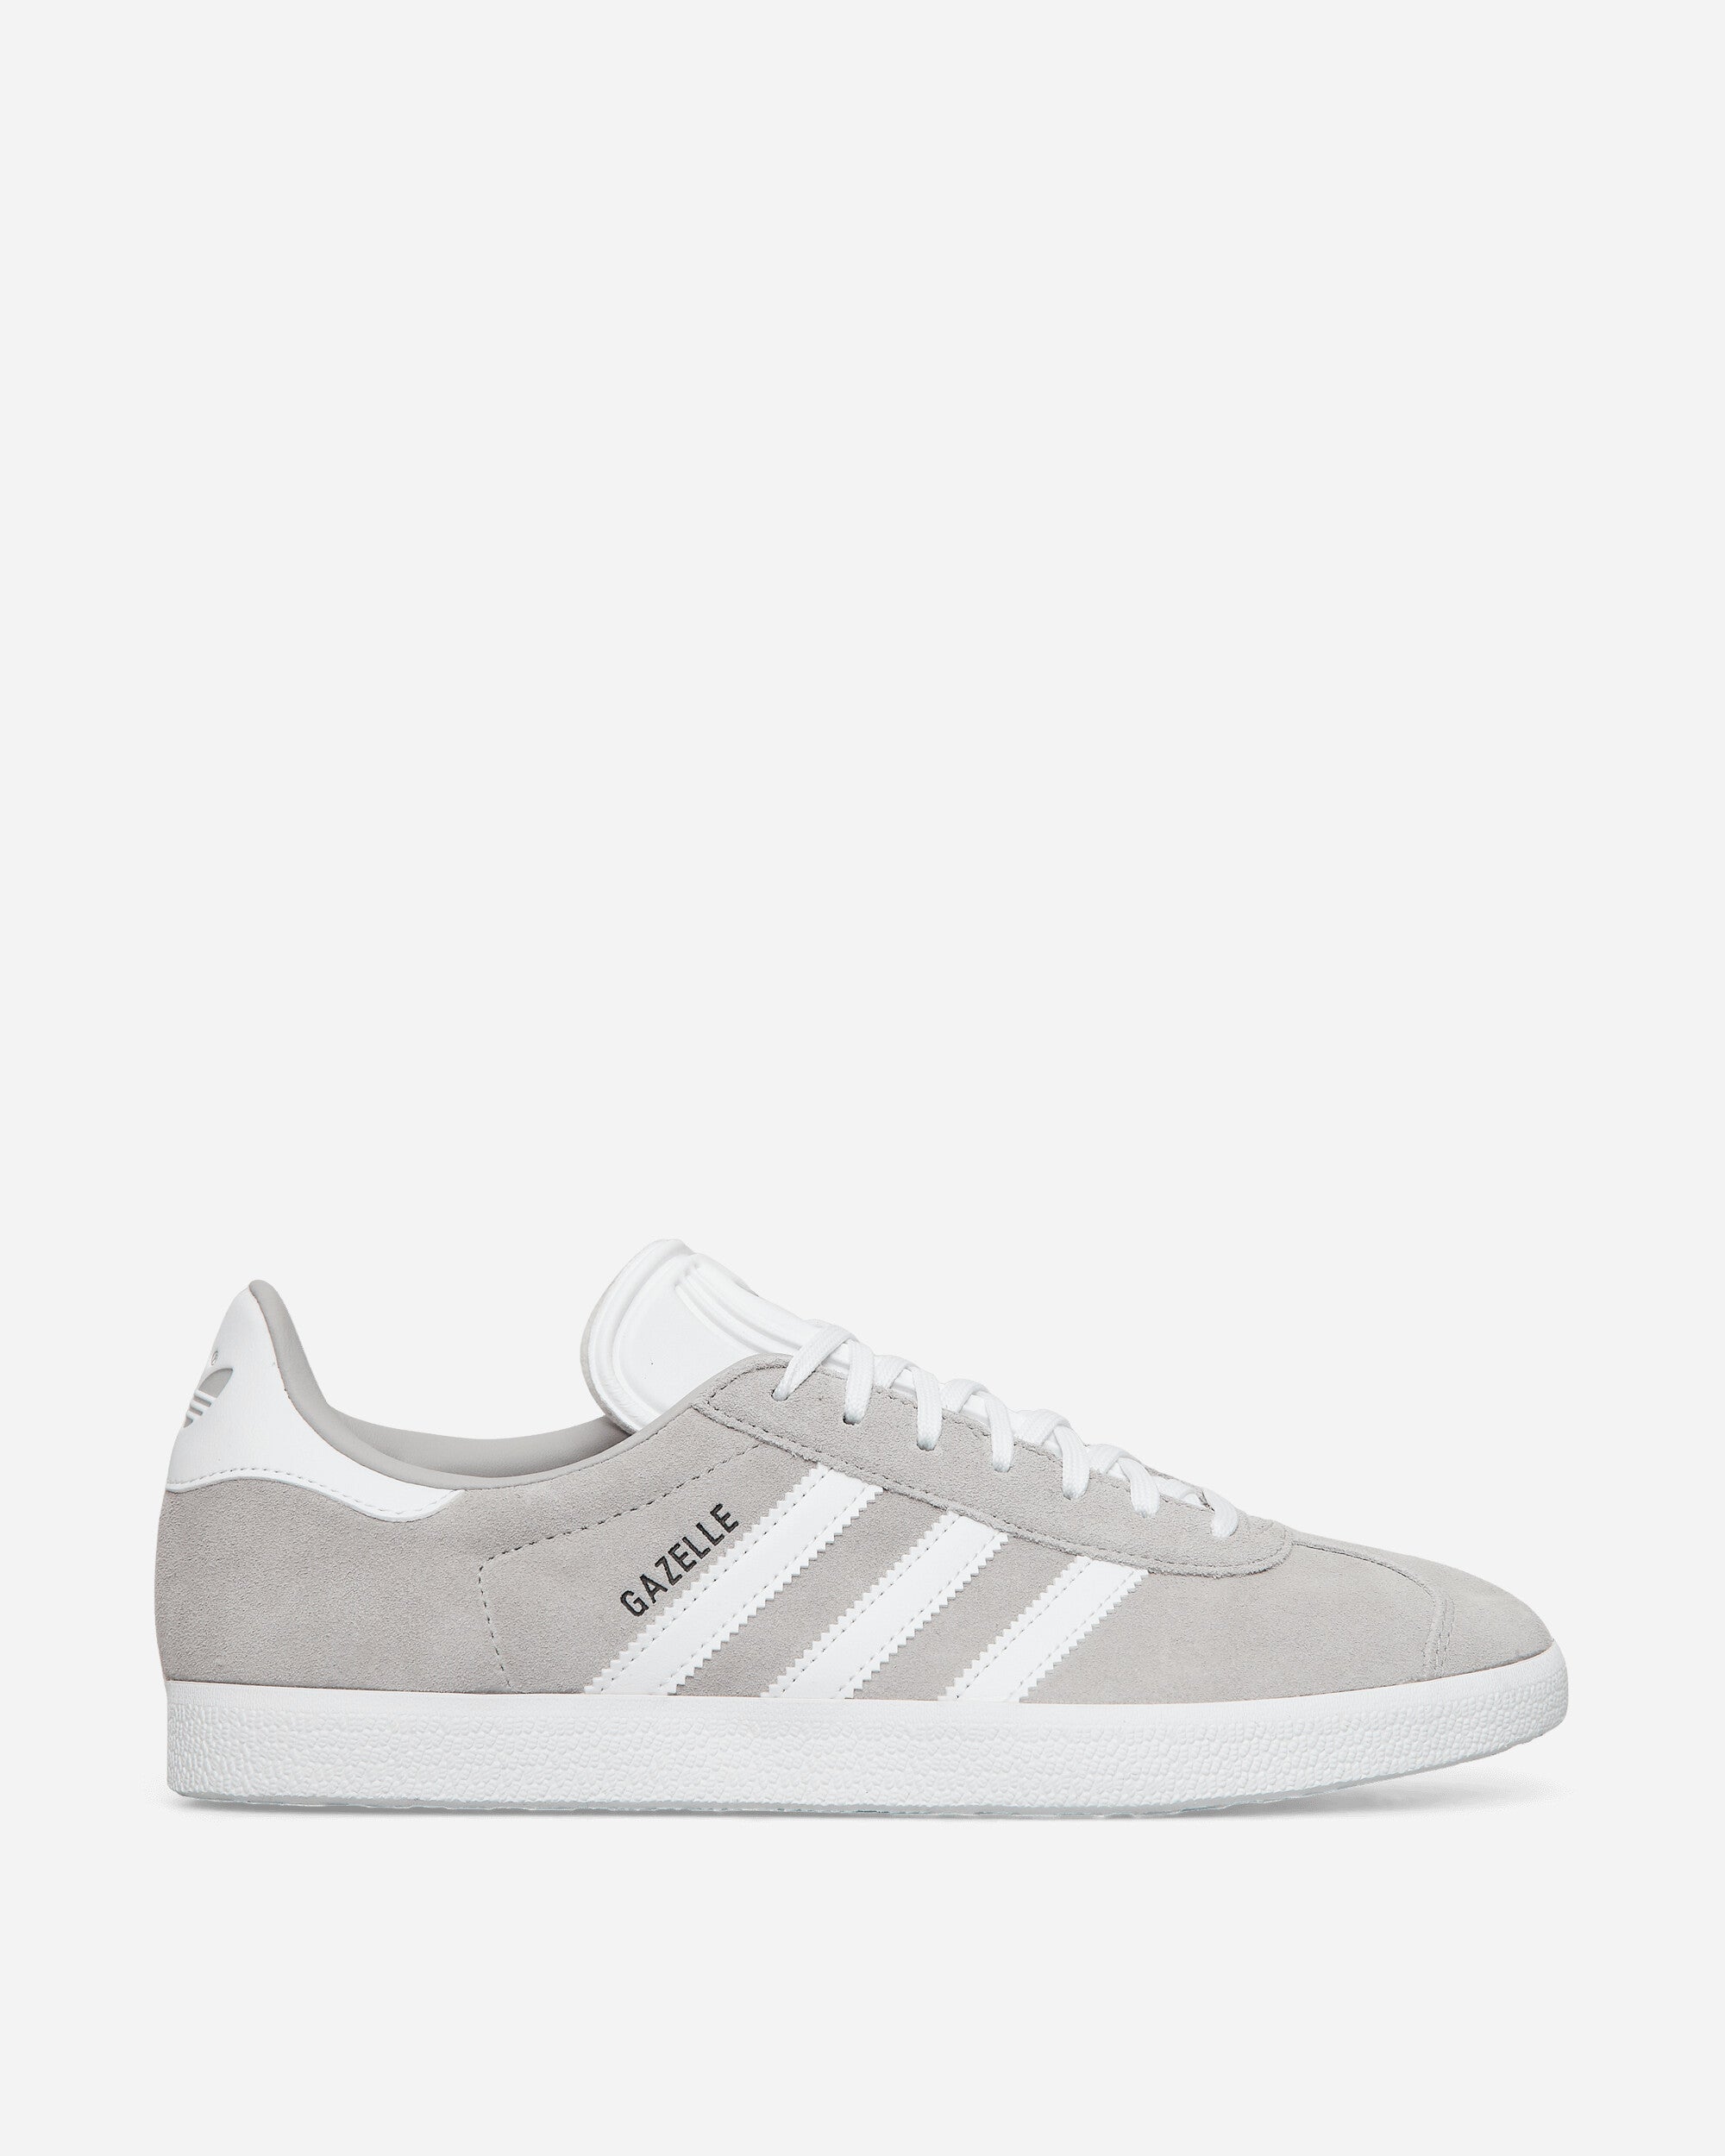 adidas Wmns Gazelle Gretwo/Ftwwht Sneakers Low IF0917 001